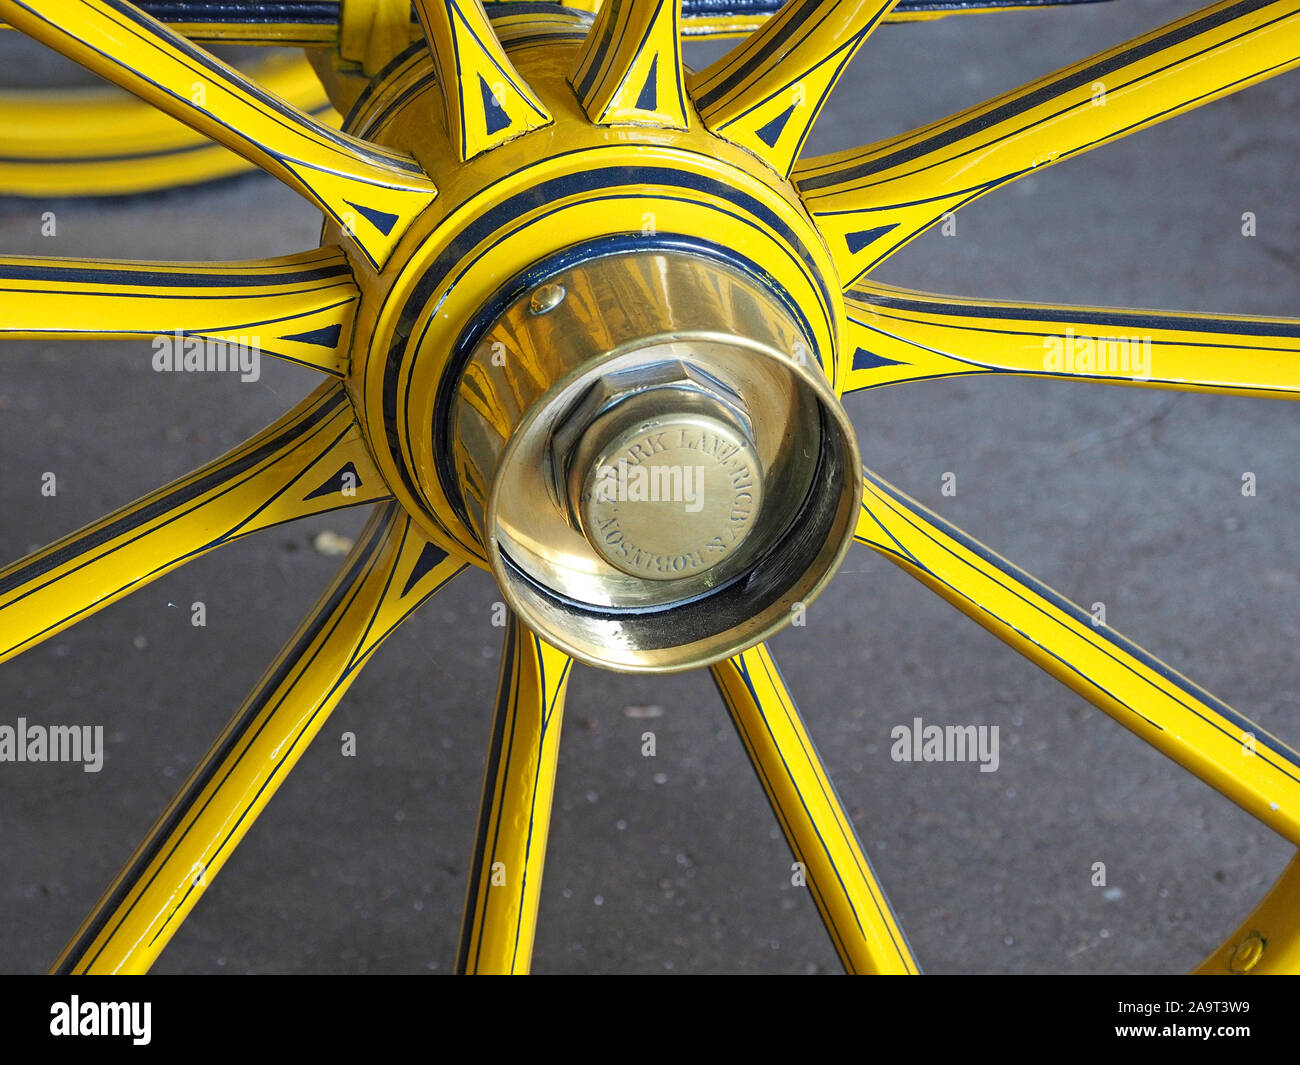 bright yellow & black spokes and axle with brass hub of wooden wheel of historic carriage in a collection in England, UK Stock Photo